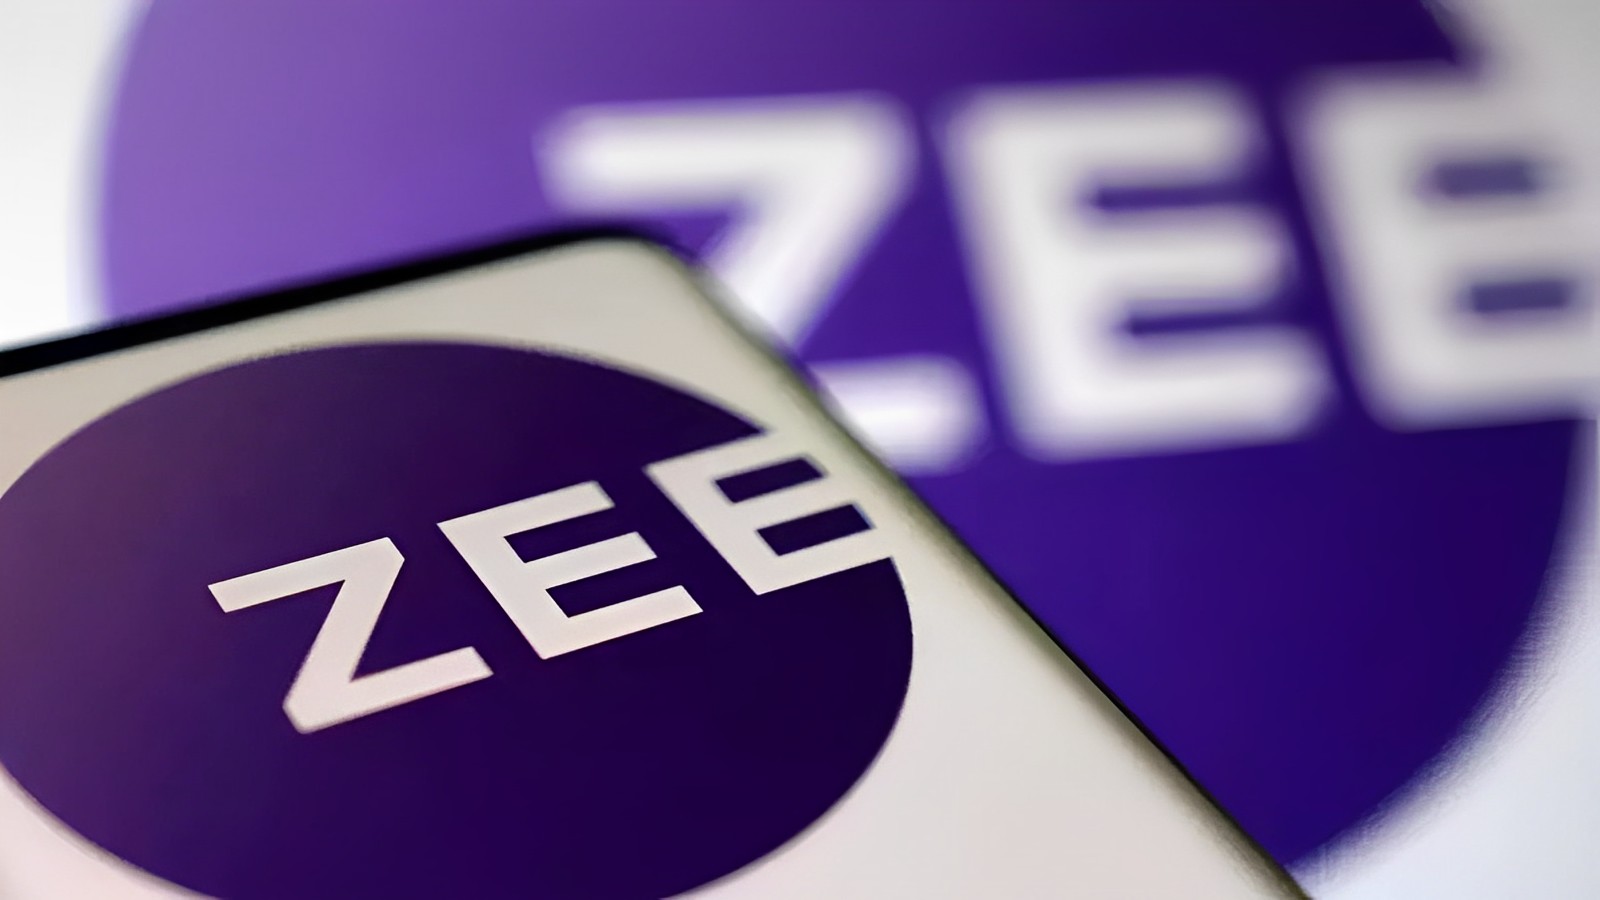 Zee to Pay IndusInd Bank $10M for Sony Deal: Report